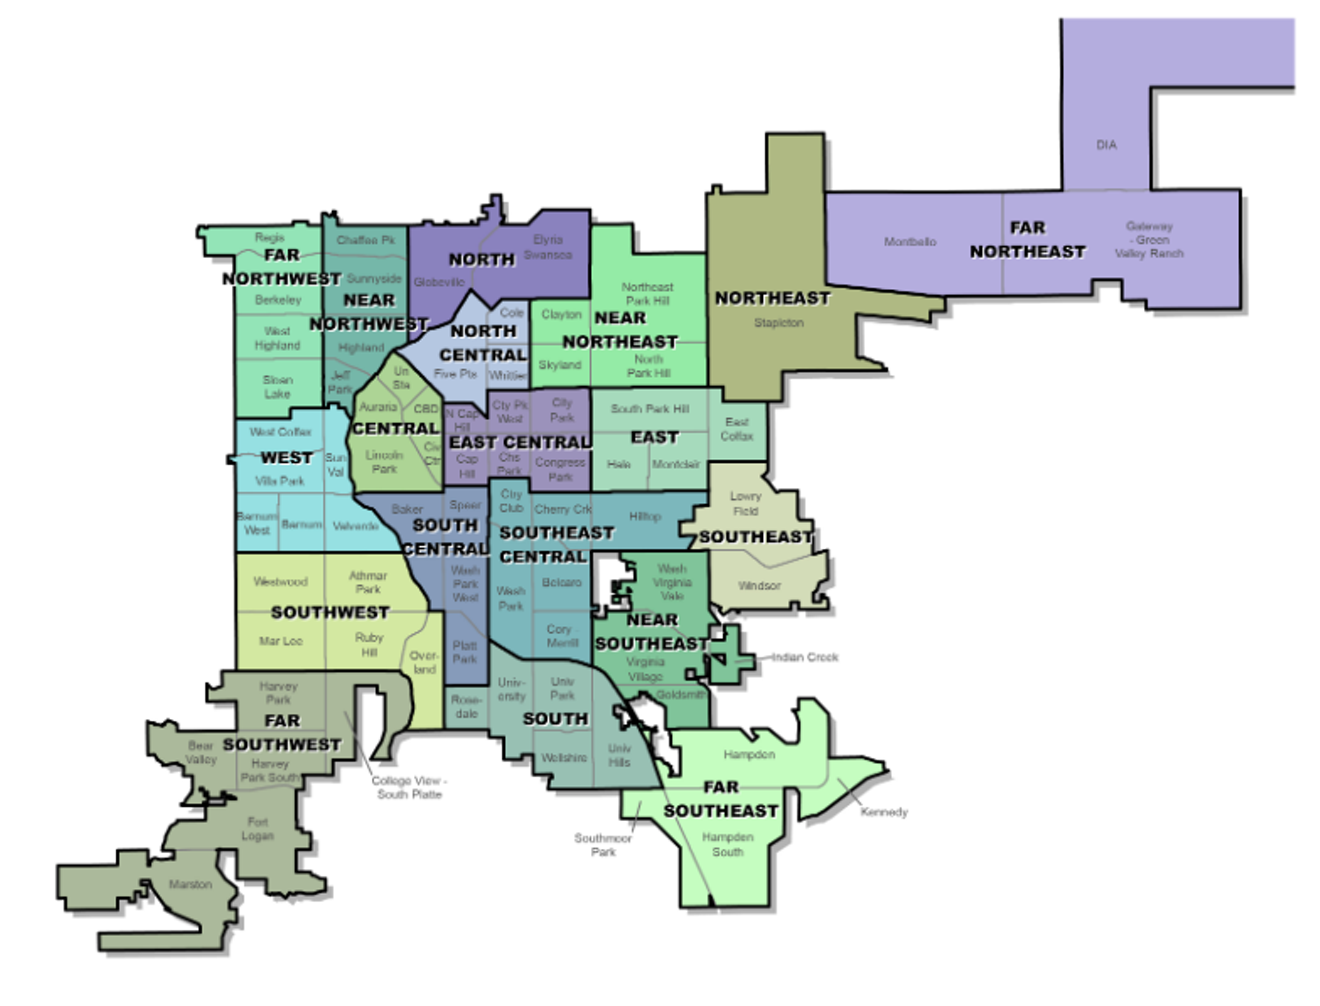 The Neighborhood Planning Initiative grouped Denver's 78 statistical neighborhoods into "areas" for planning efficiency.